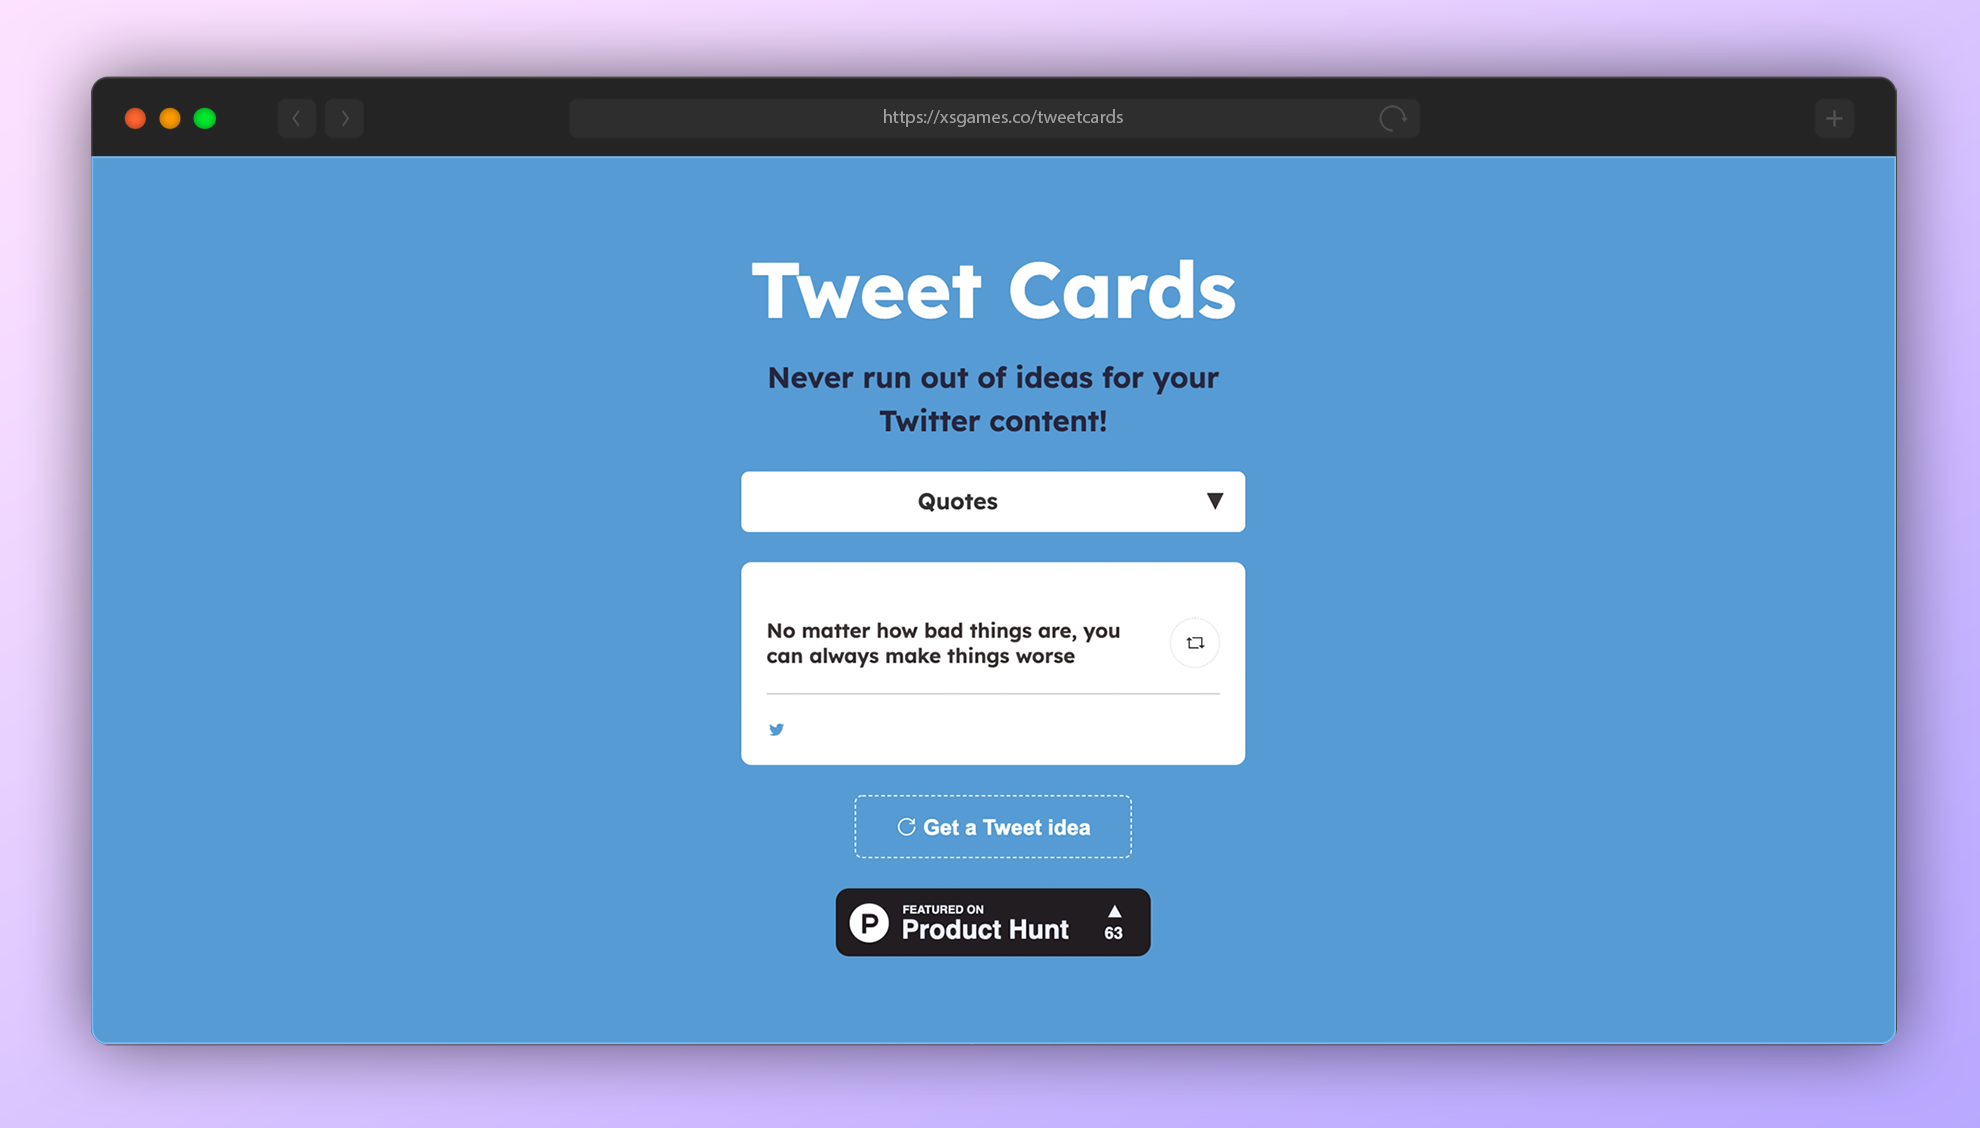 Tweet Cards - Never run out of ideas